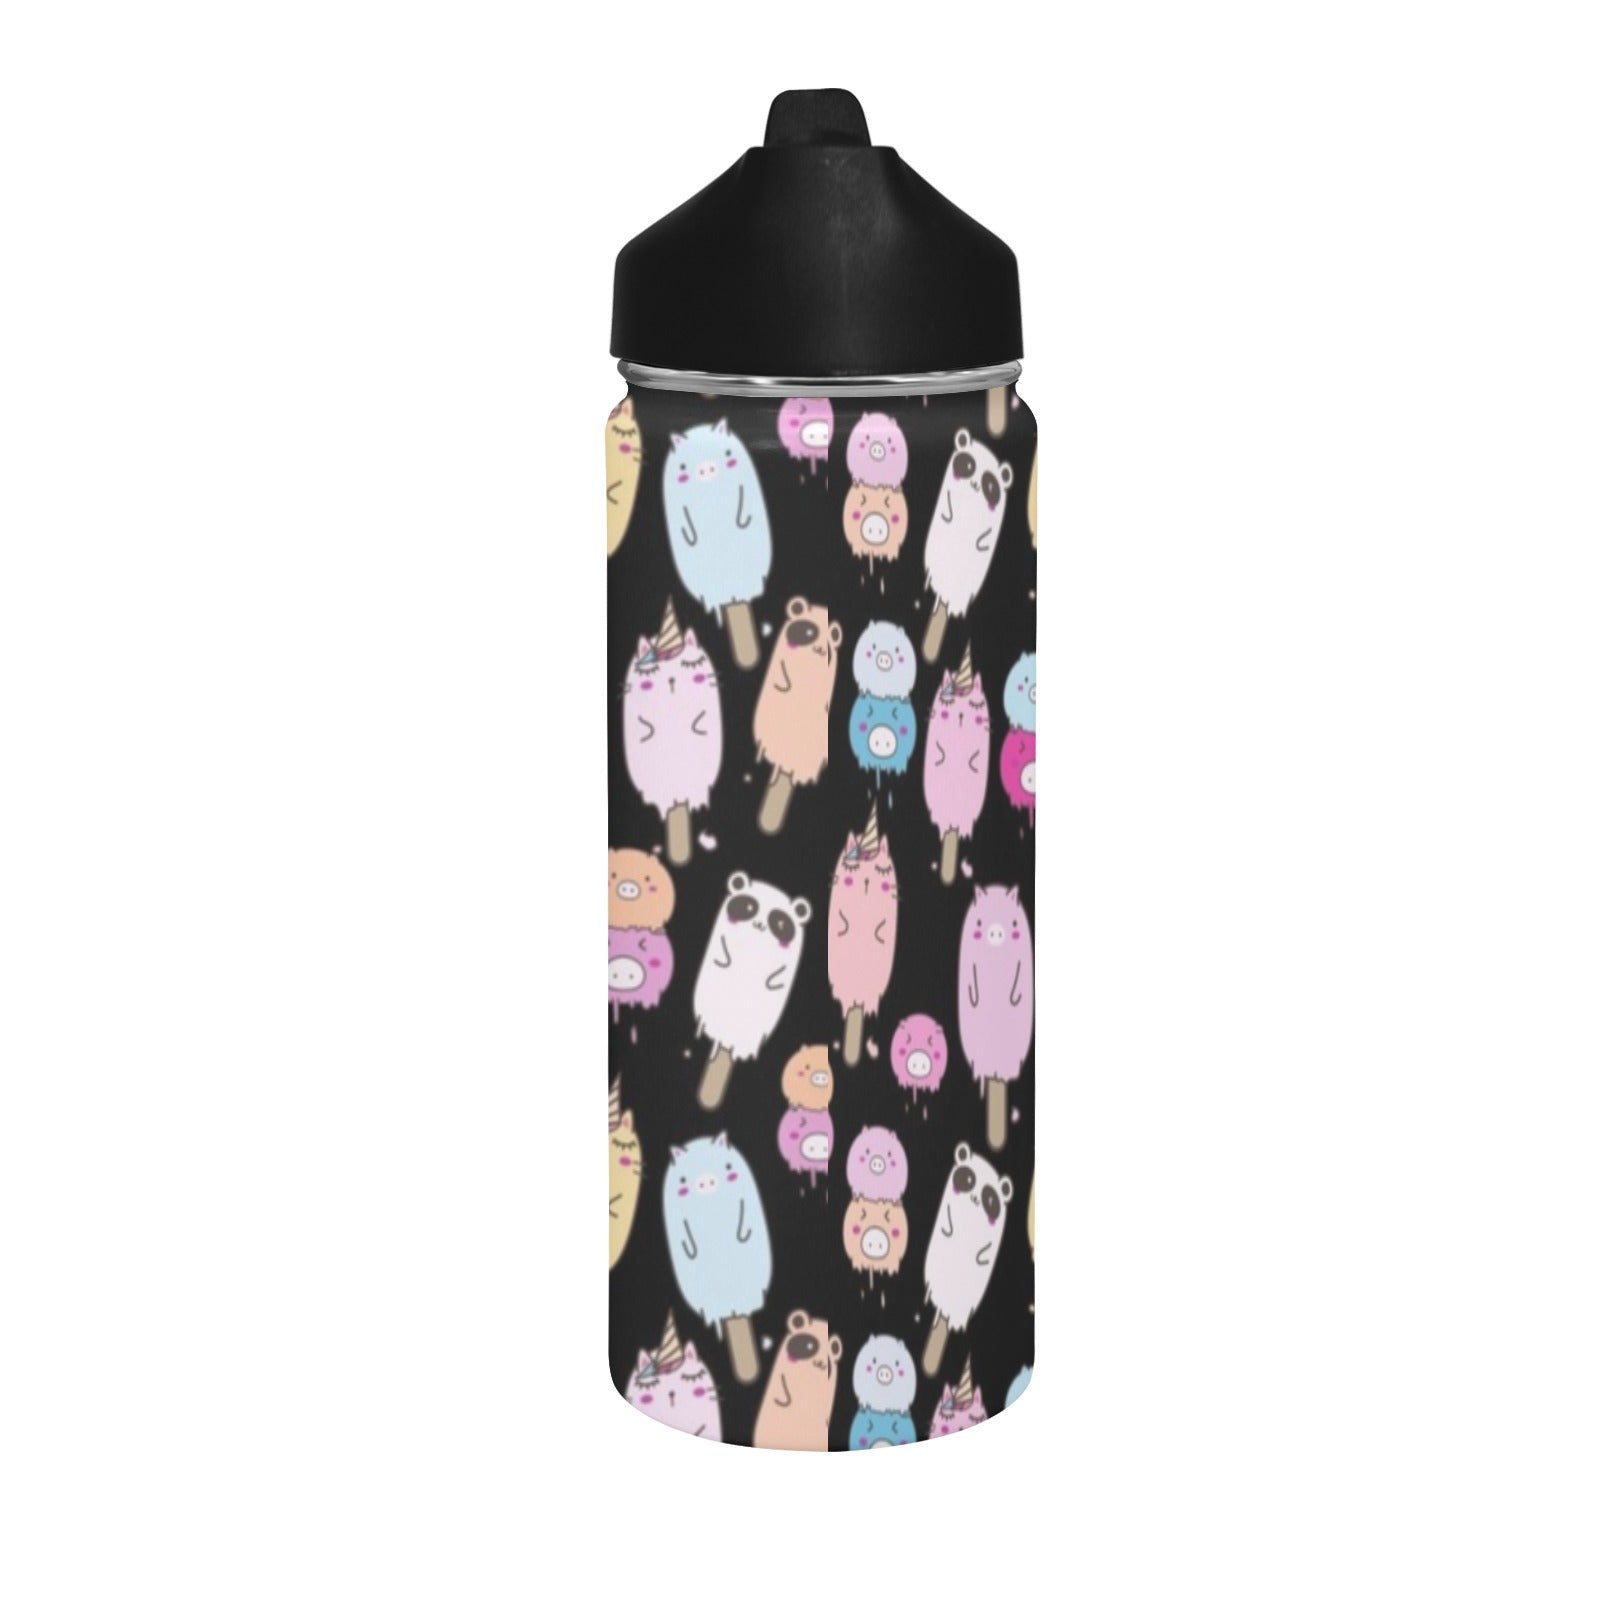 Cute Animal Ice Blocks - Insulated Water Bottle with Straw Lid (18 oz) Insulated Water Bottle with Straw Lid